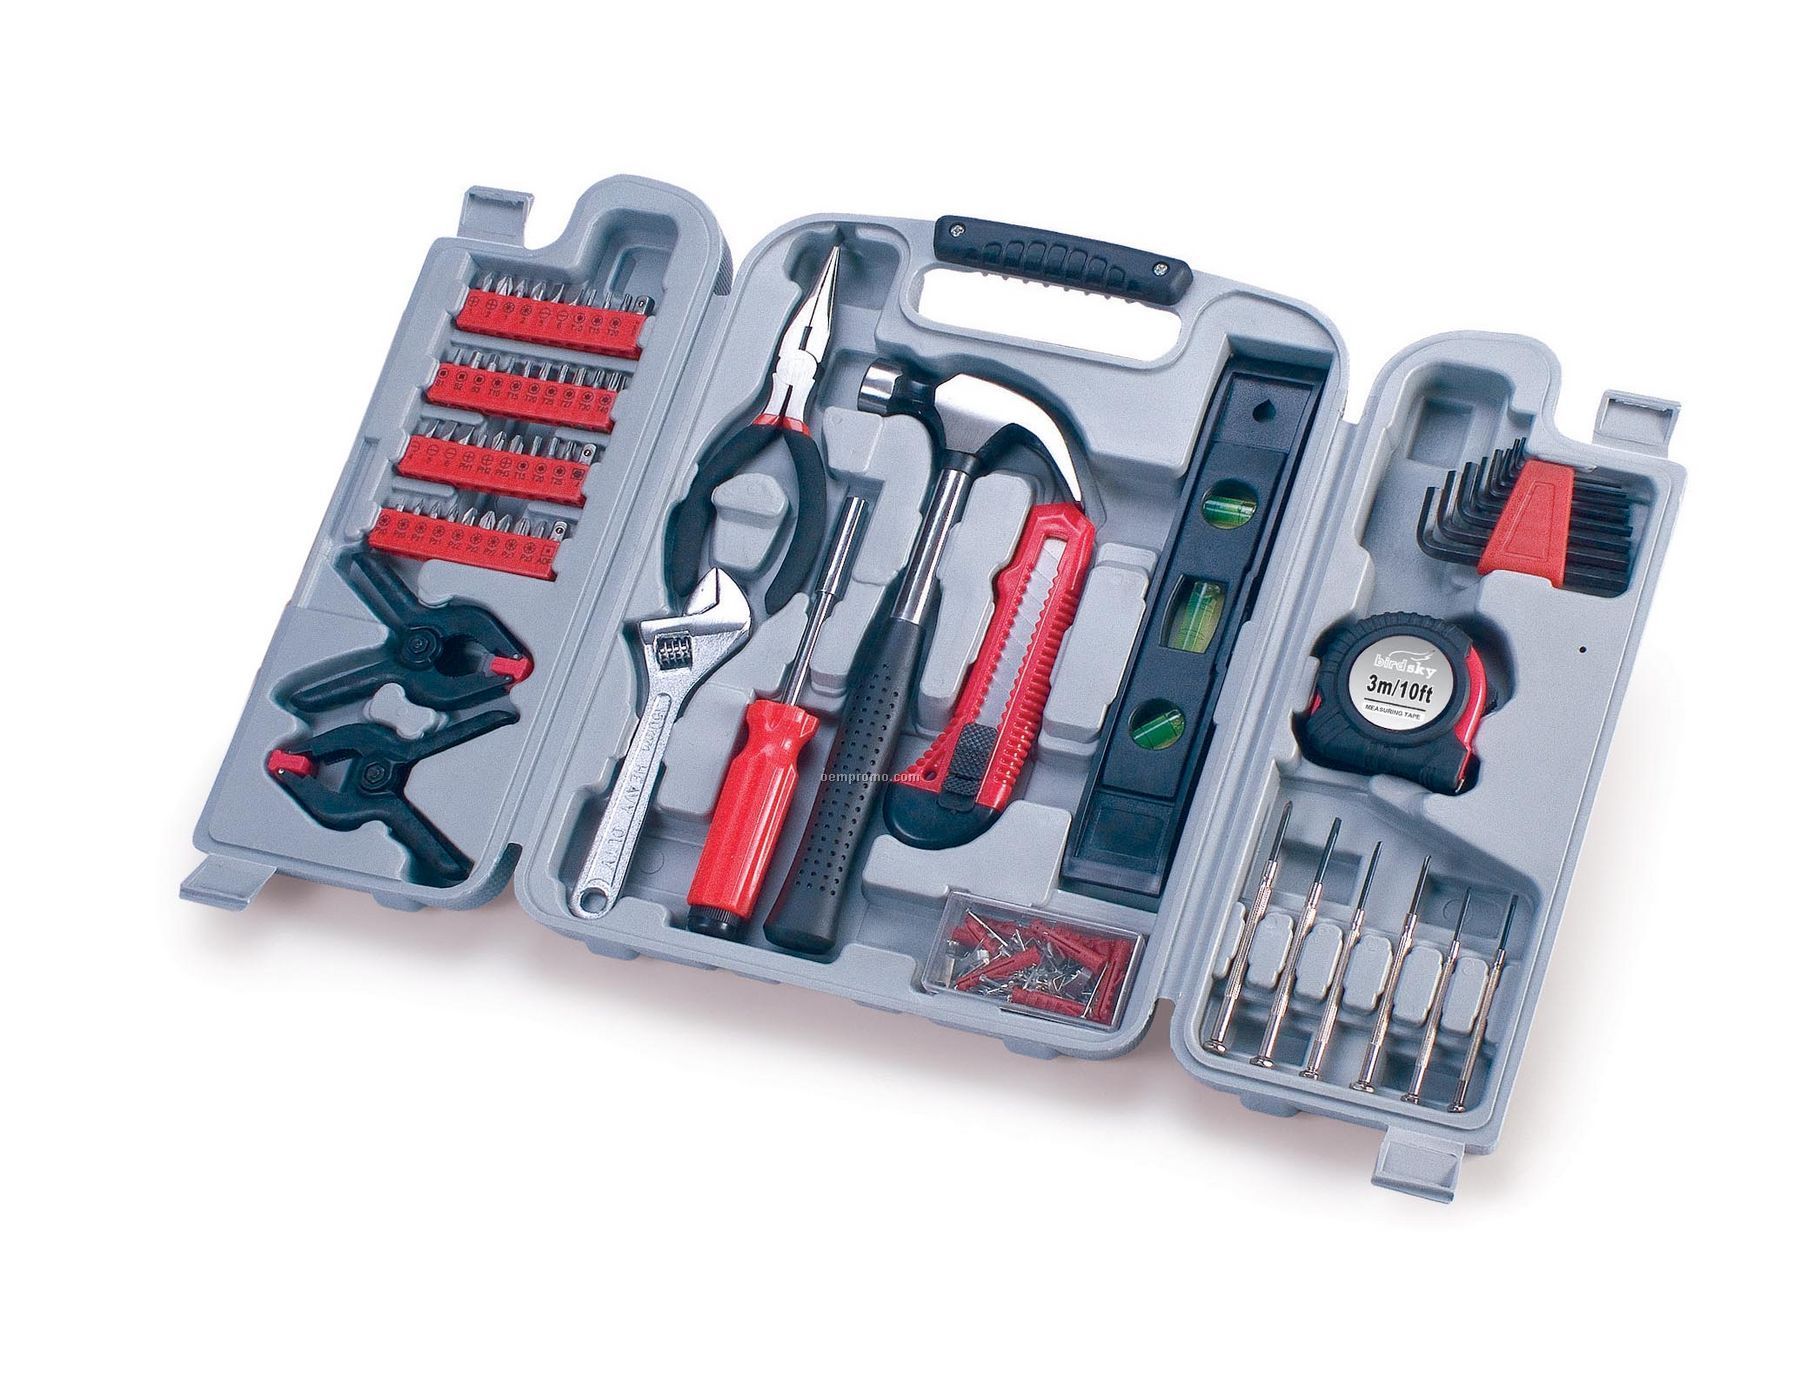 Apprentice Tool Kit W/ Molded Carrying Case (Red & Black Handles)